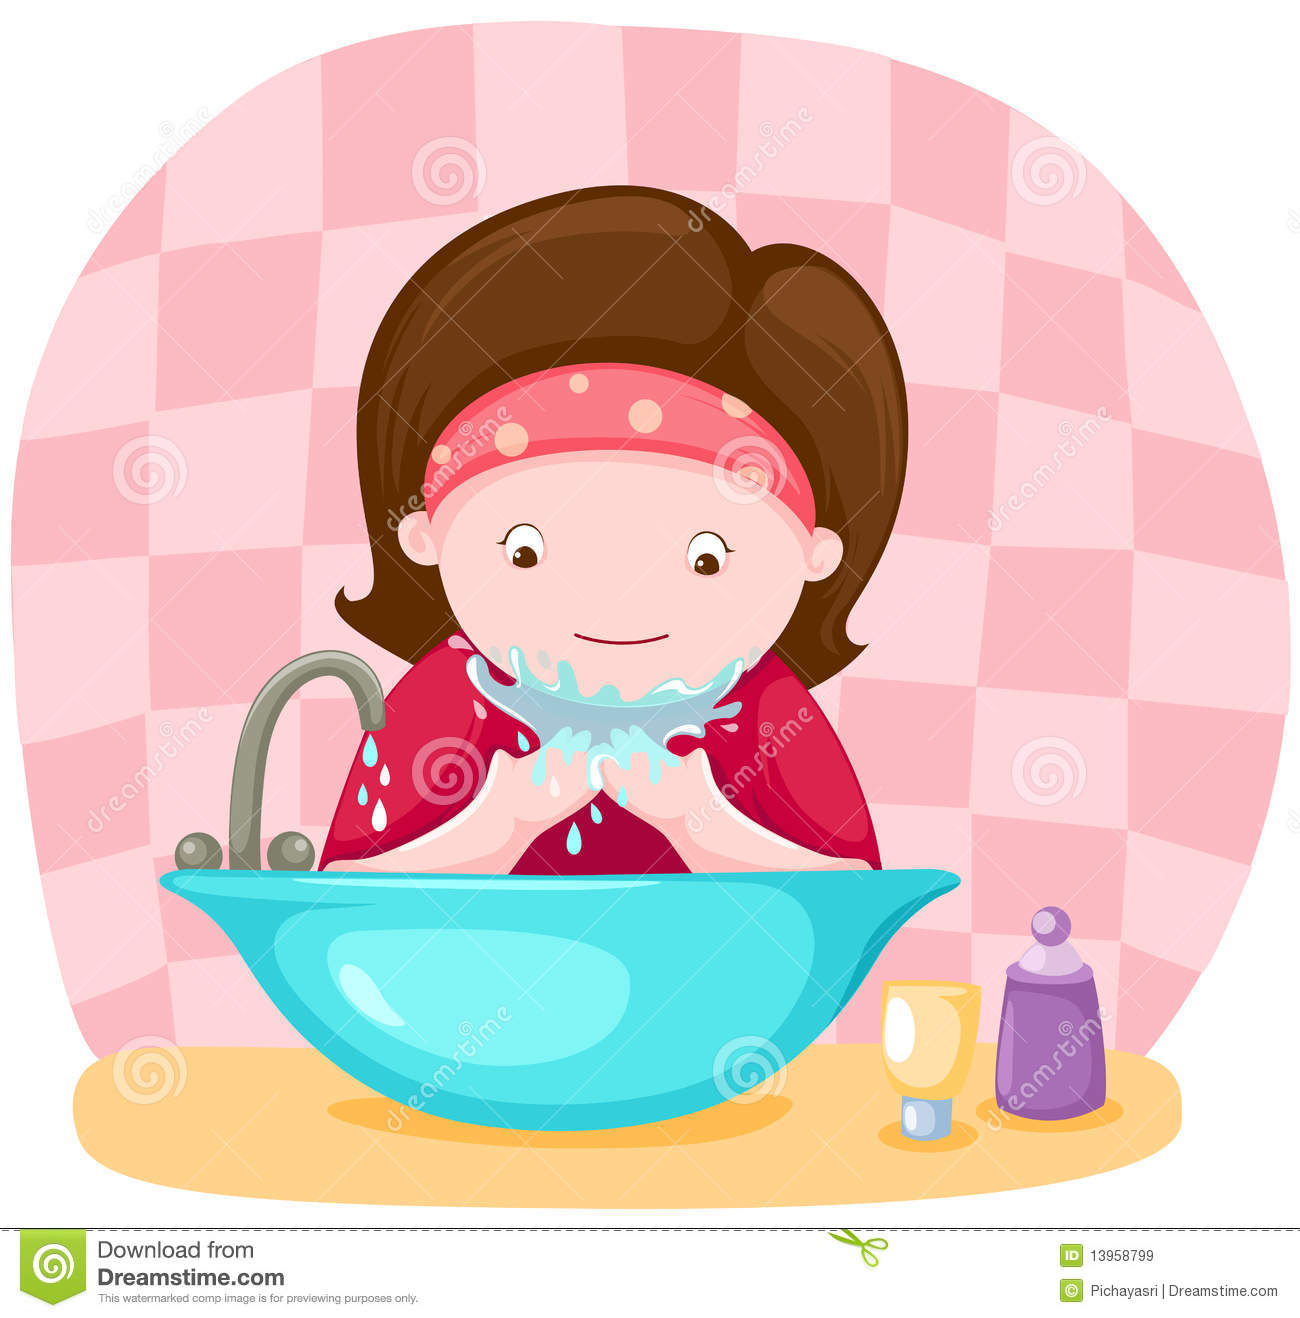 Royalty Free Stock Images  Girl Washing Her Face